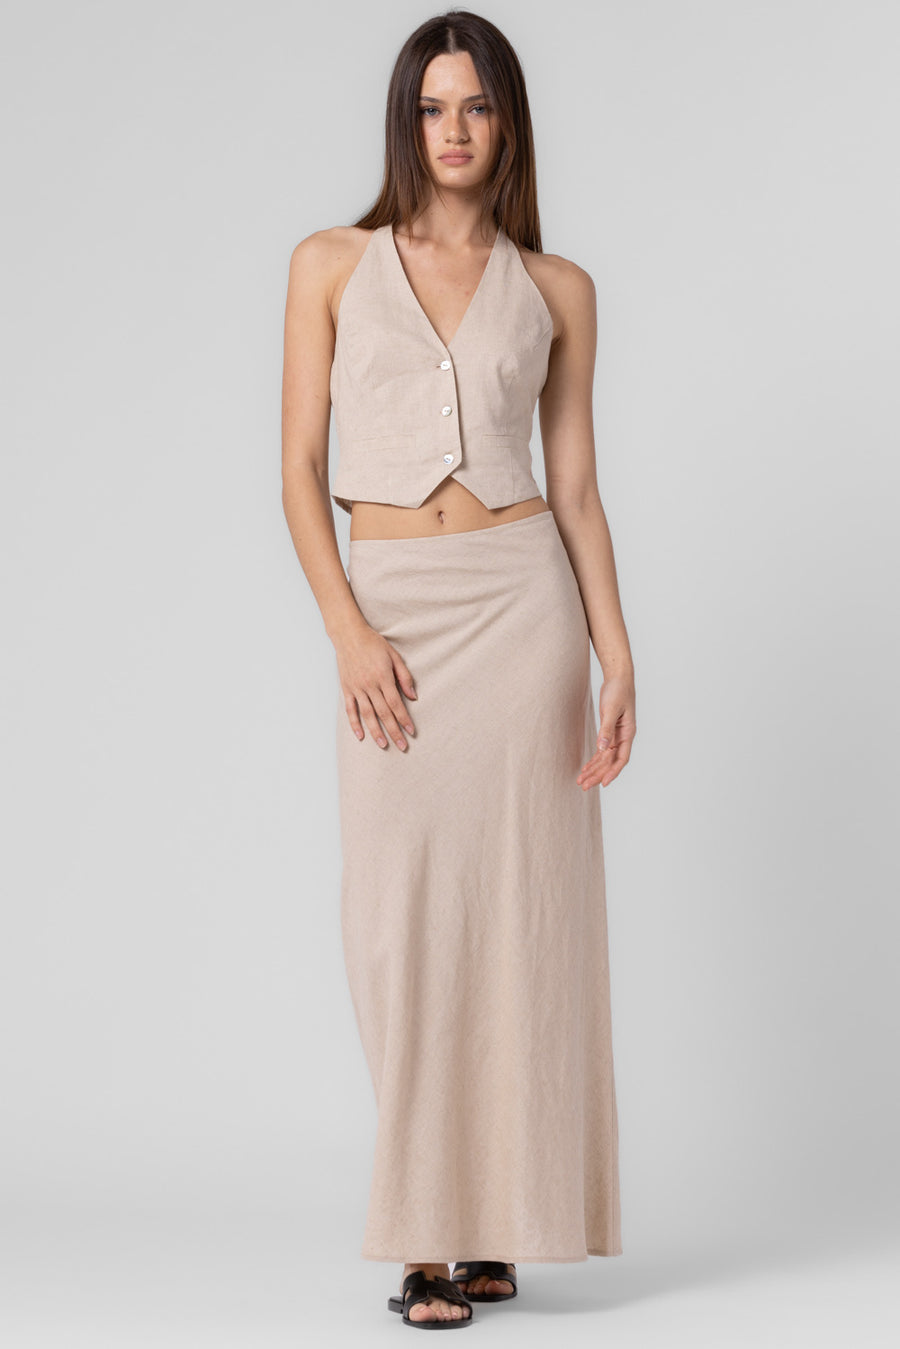 Pairs with the matching Leland Halter Vest  Featuring a solid color midi skirt In the color oat 